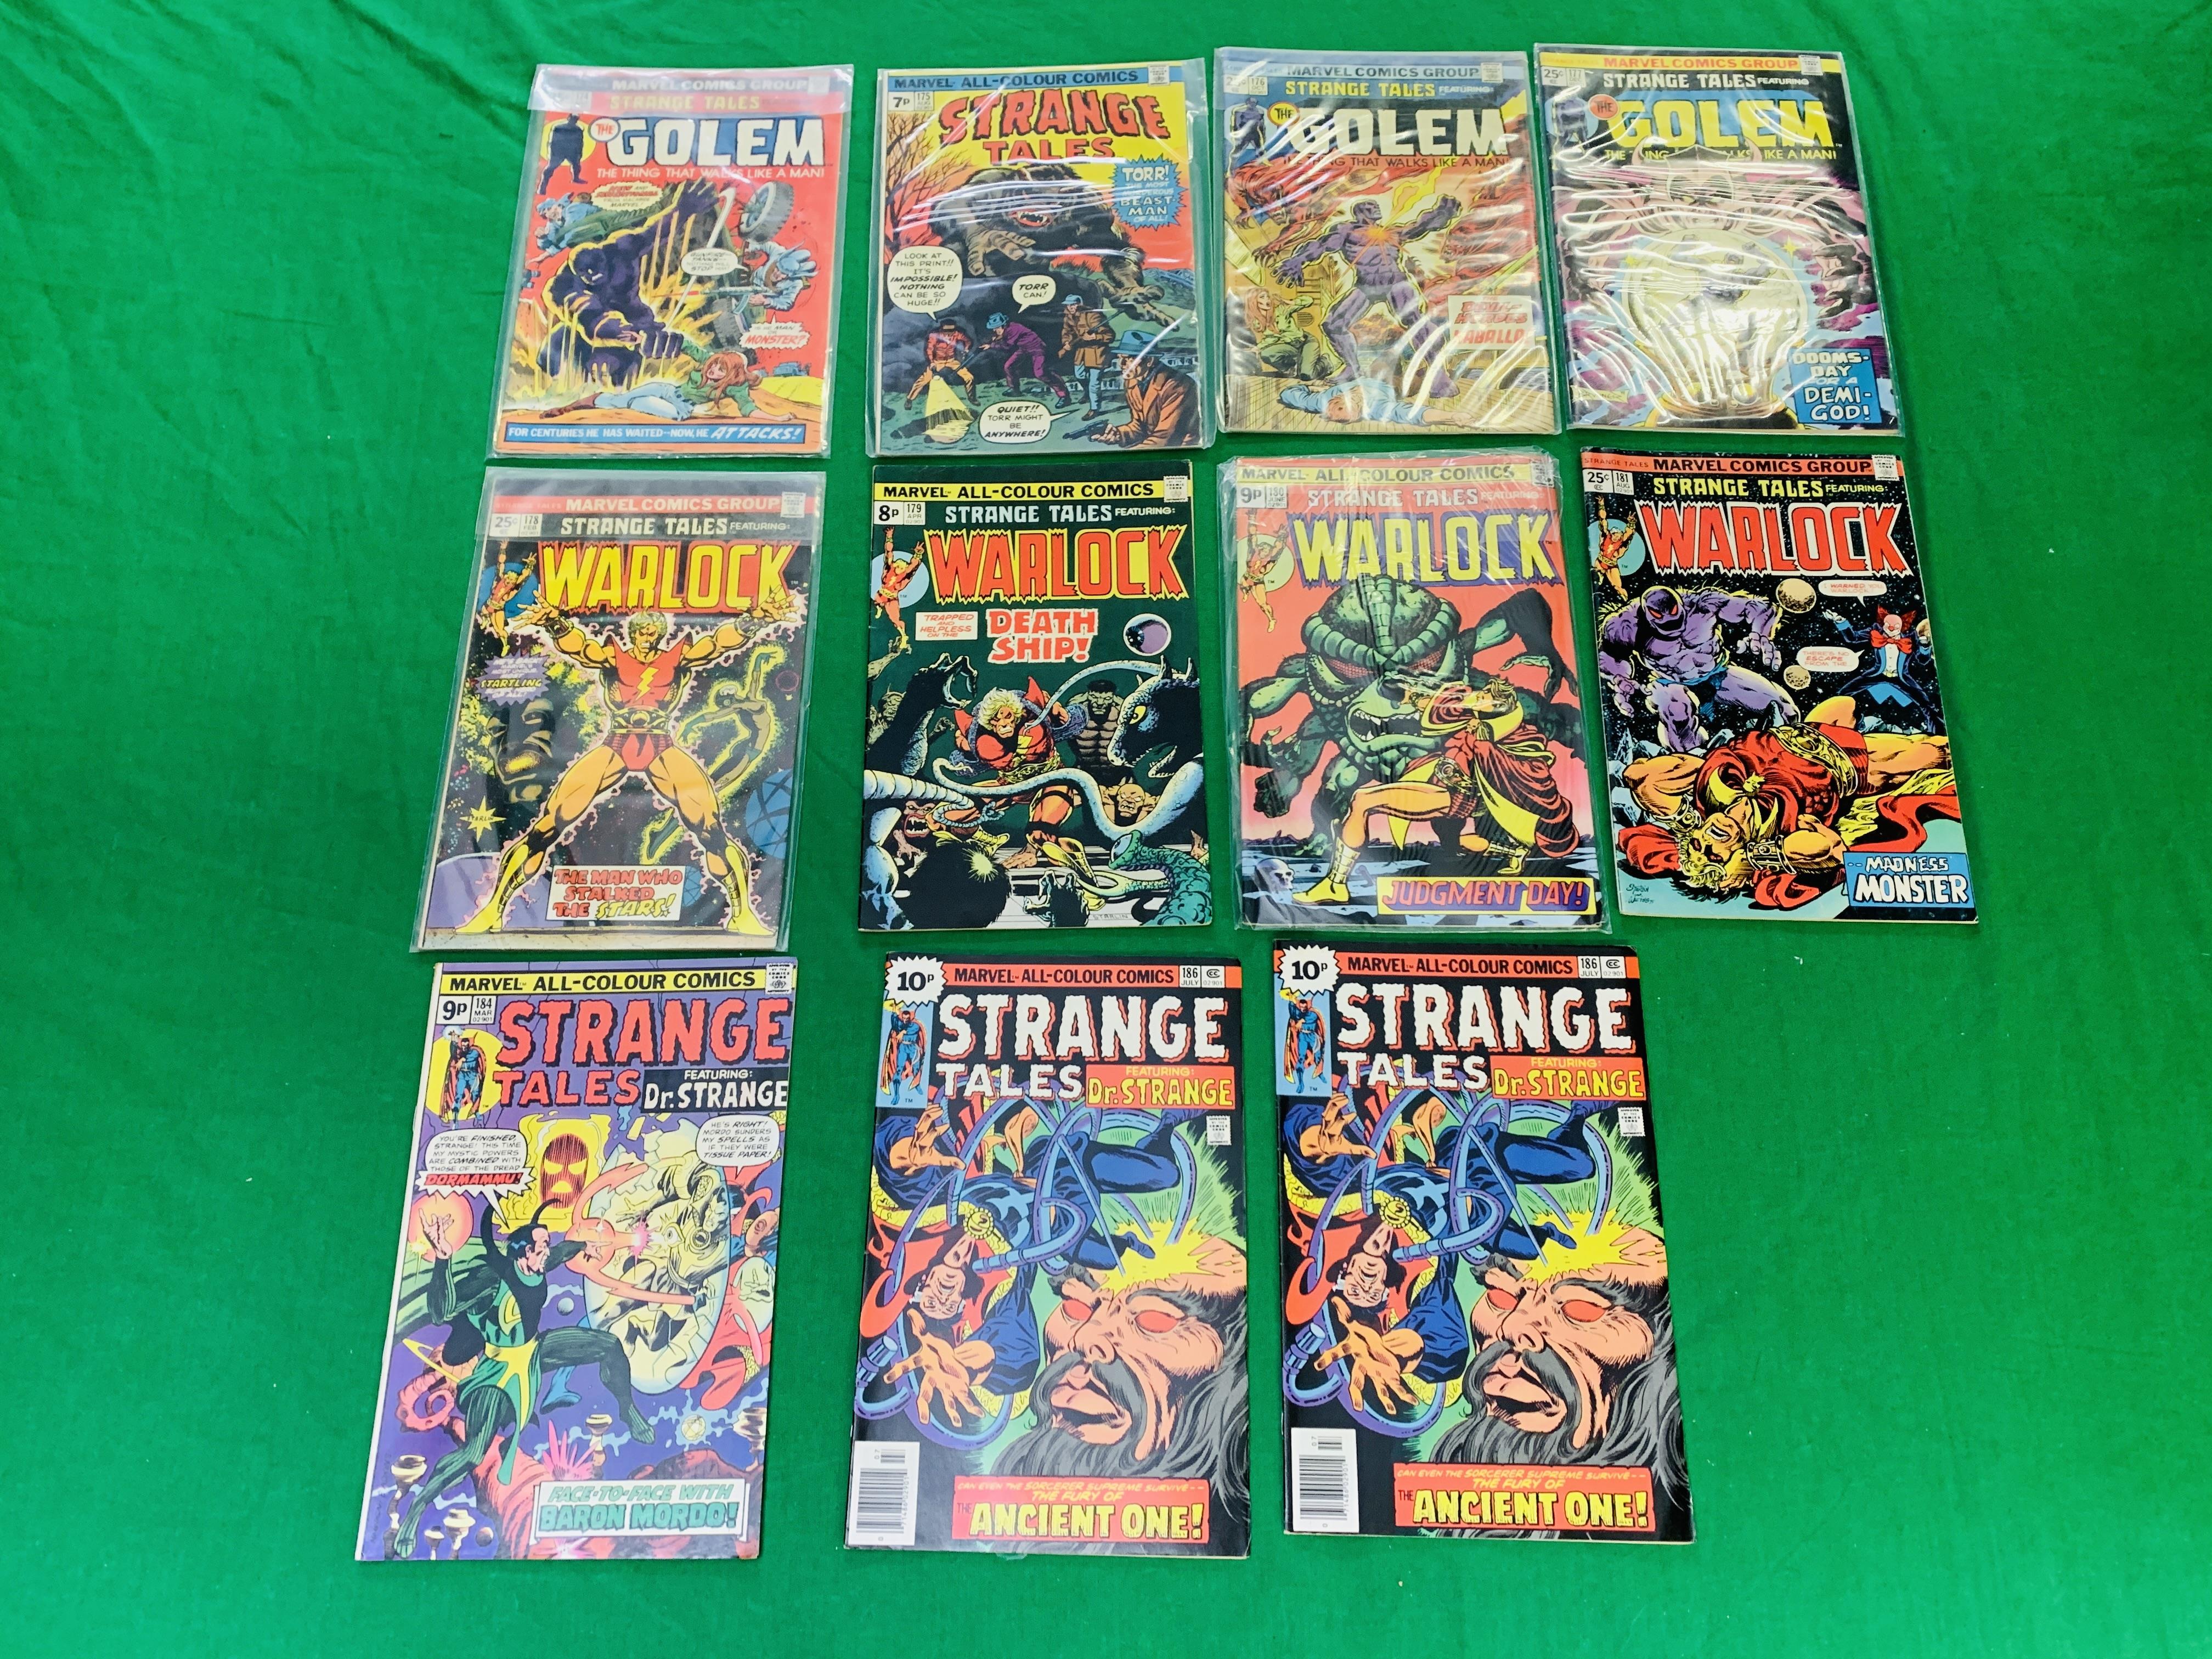 MARVEL STRANGE TALES, NO. 174 - 181, 184, 186. FROM 1974. NO. 178 IS THE FIRST APPEARANCE OF MAGNUS.